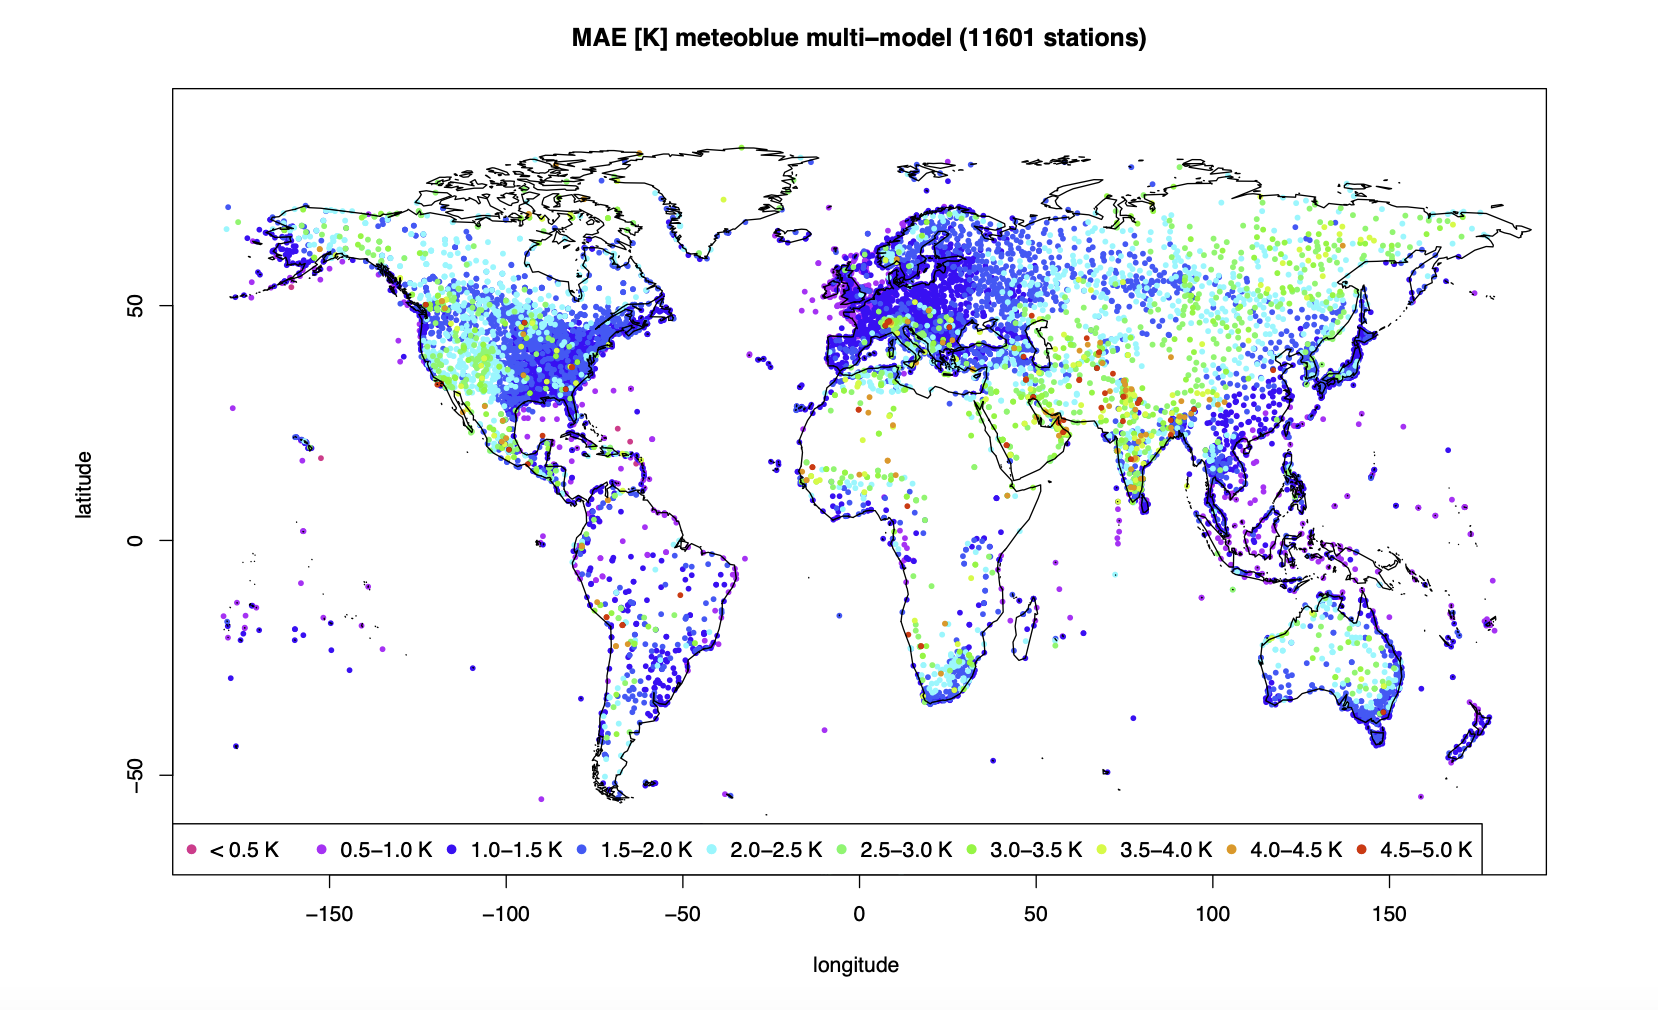 MAE [K] of the meteoblue MultiModel used in operational forecast, verified with over 10'000 measurements worldwide of the year 2018.